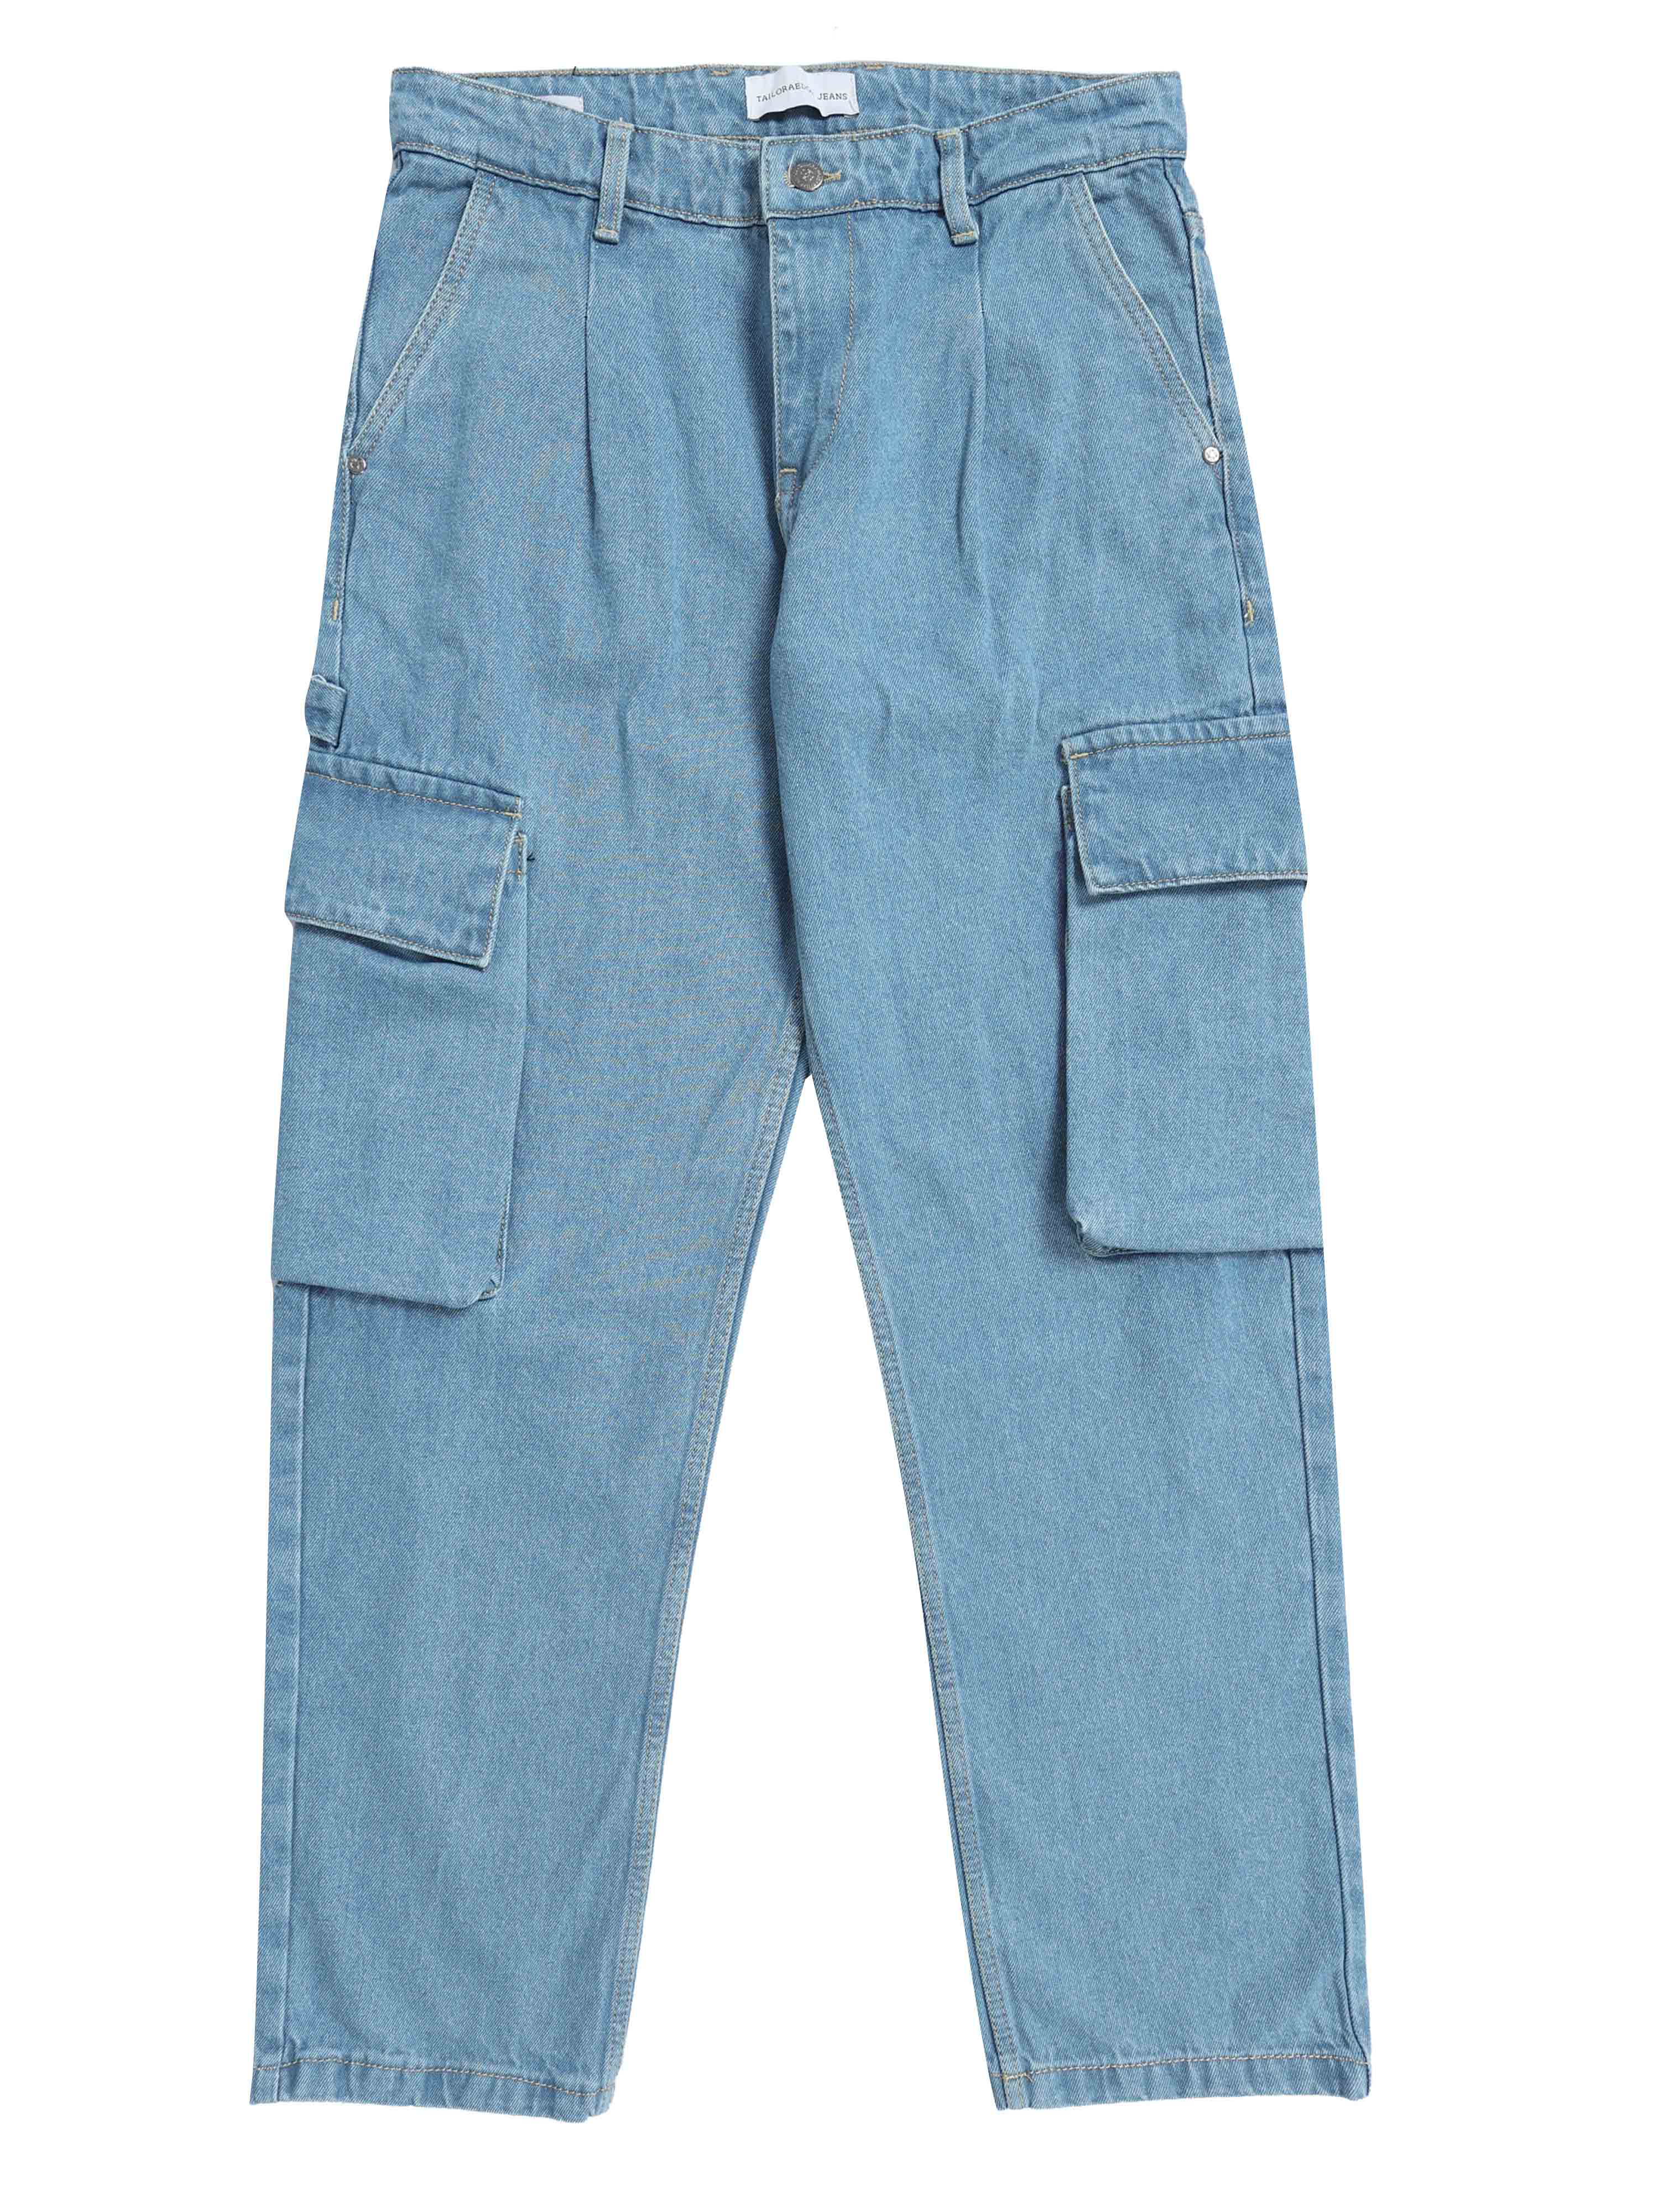 Classic Relaxed Light Blue Double Cargo Denim